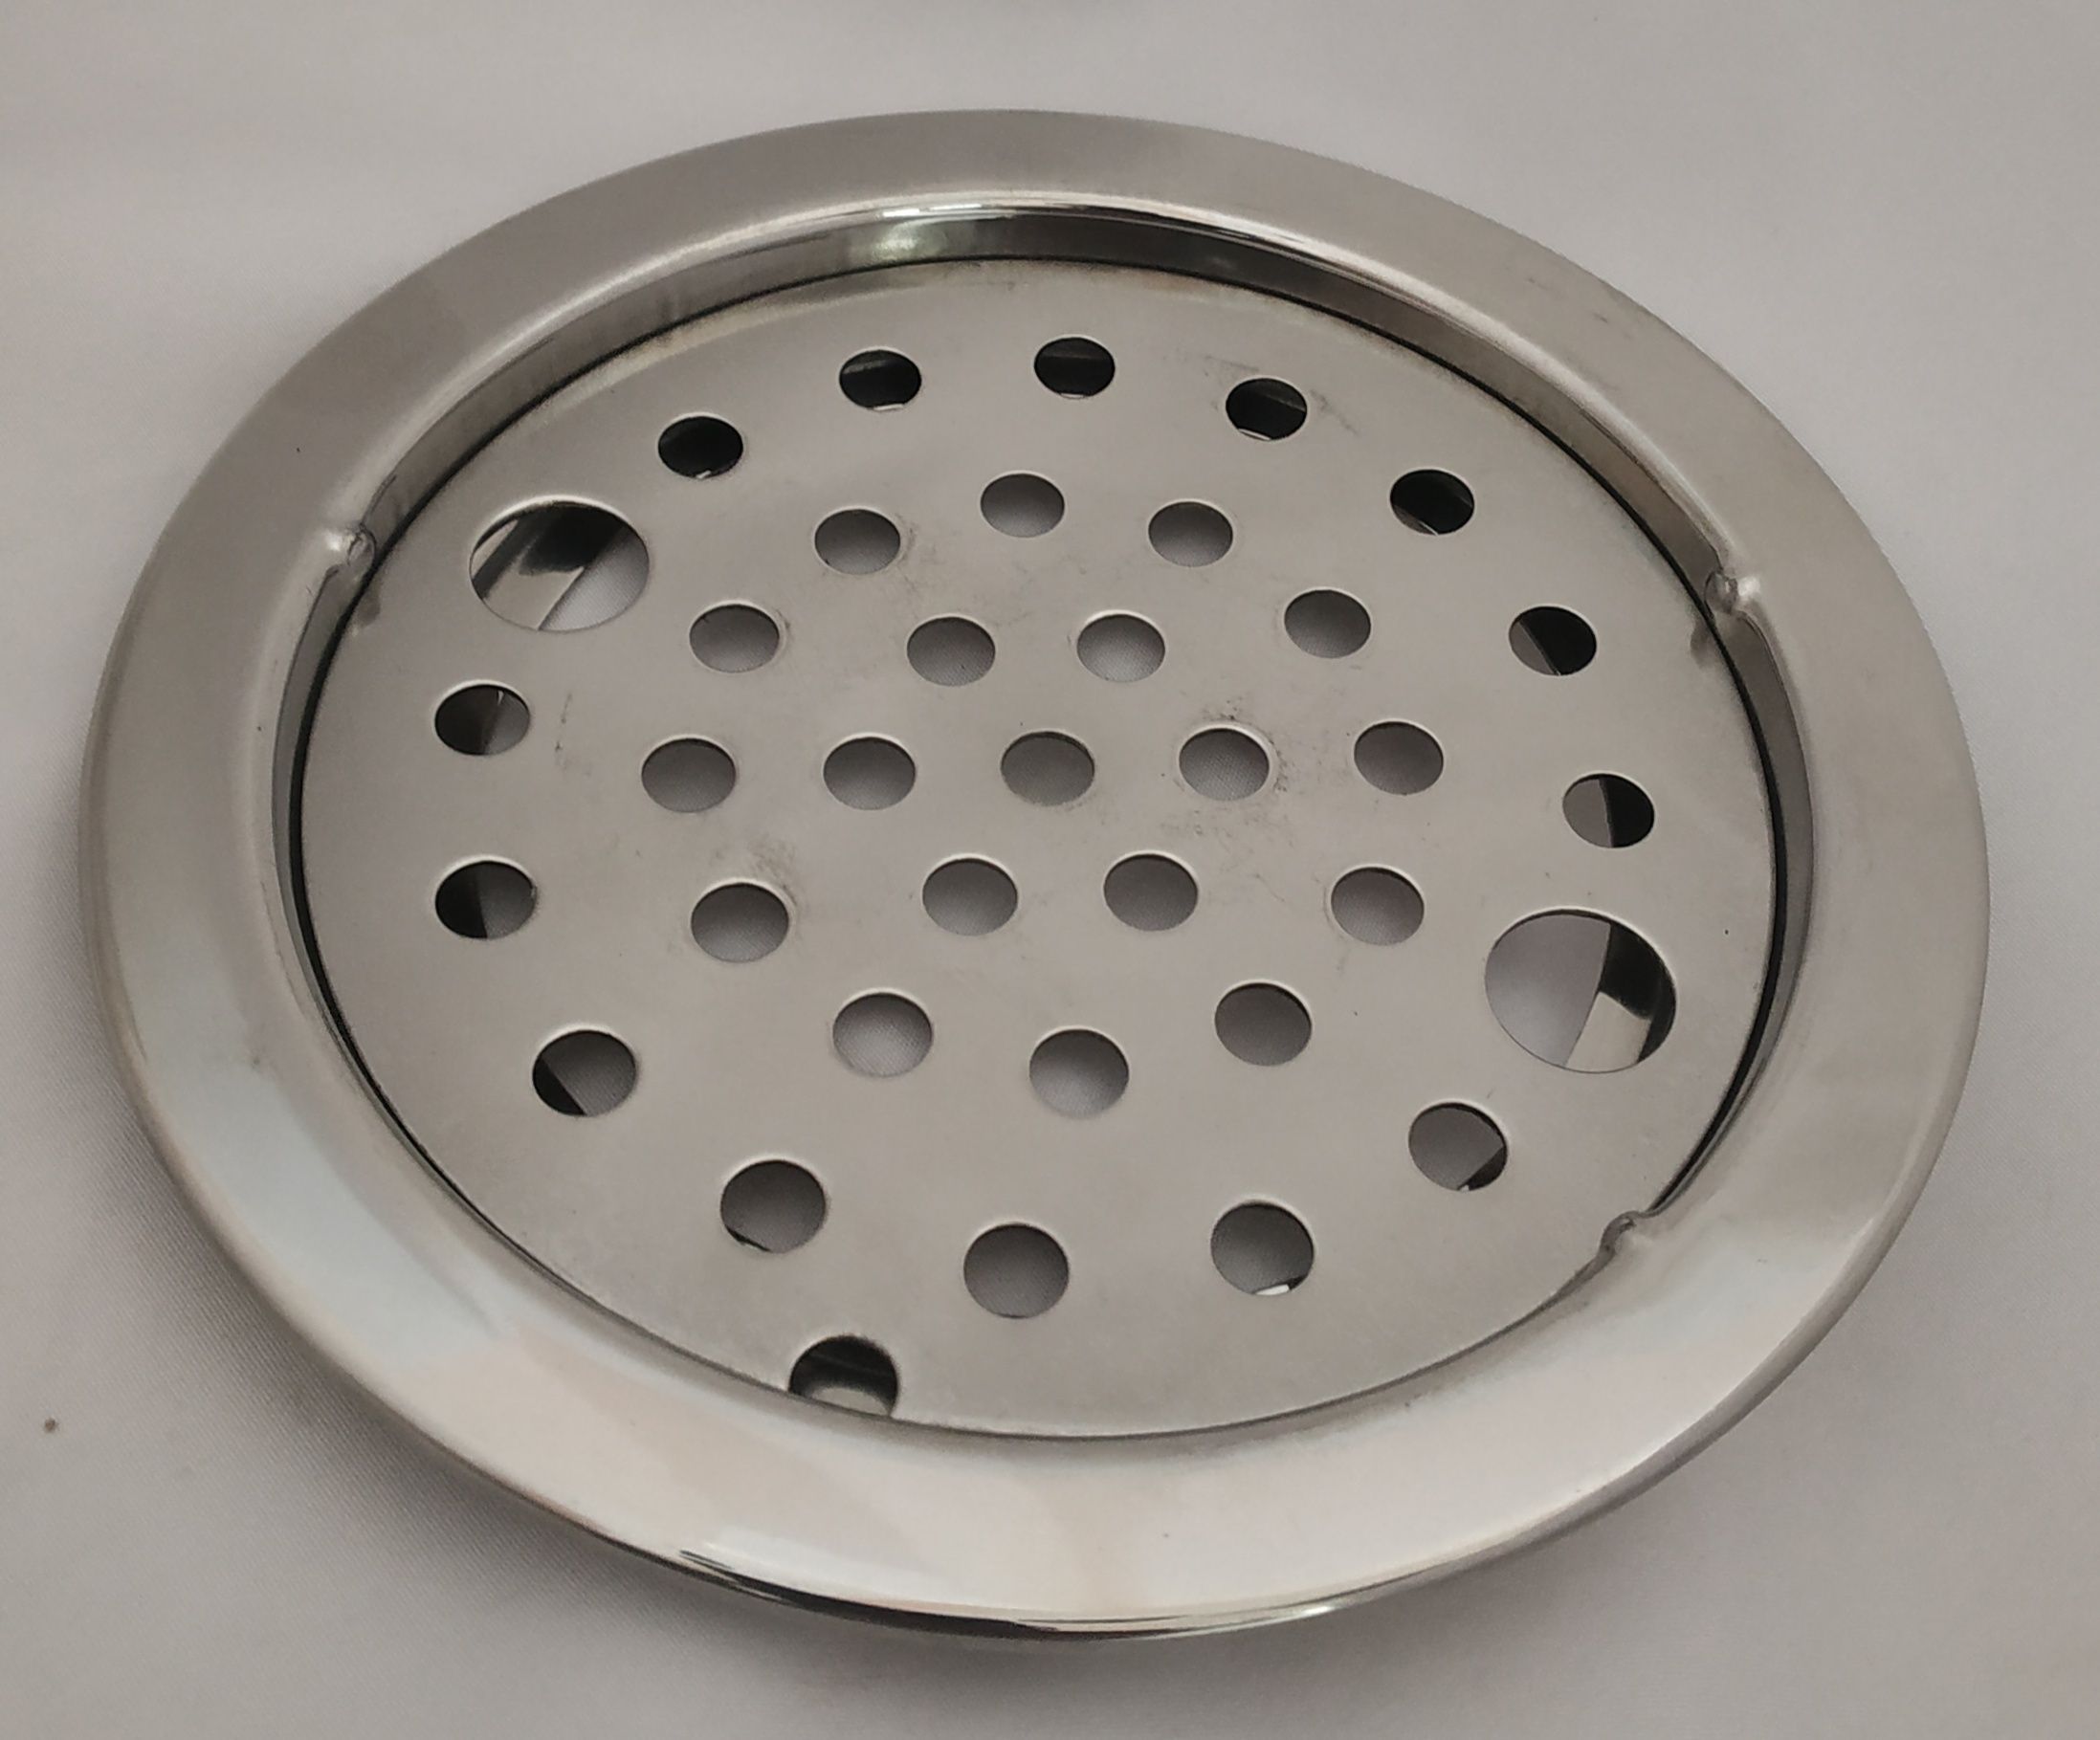 Stainless Steel Anti-Cockroach Floor Drain Cover